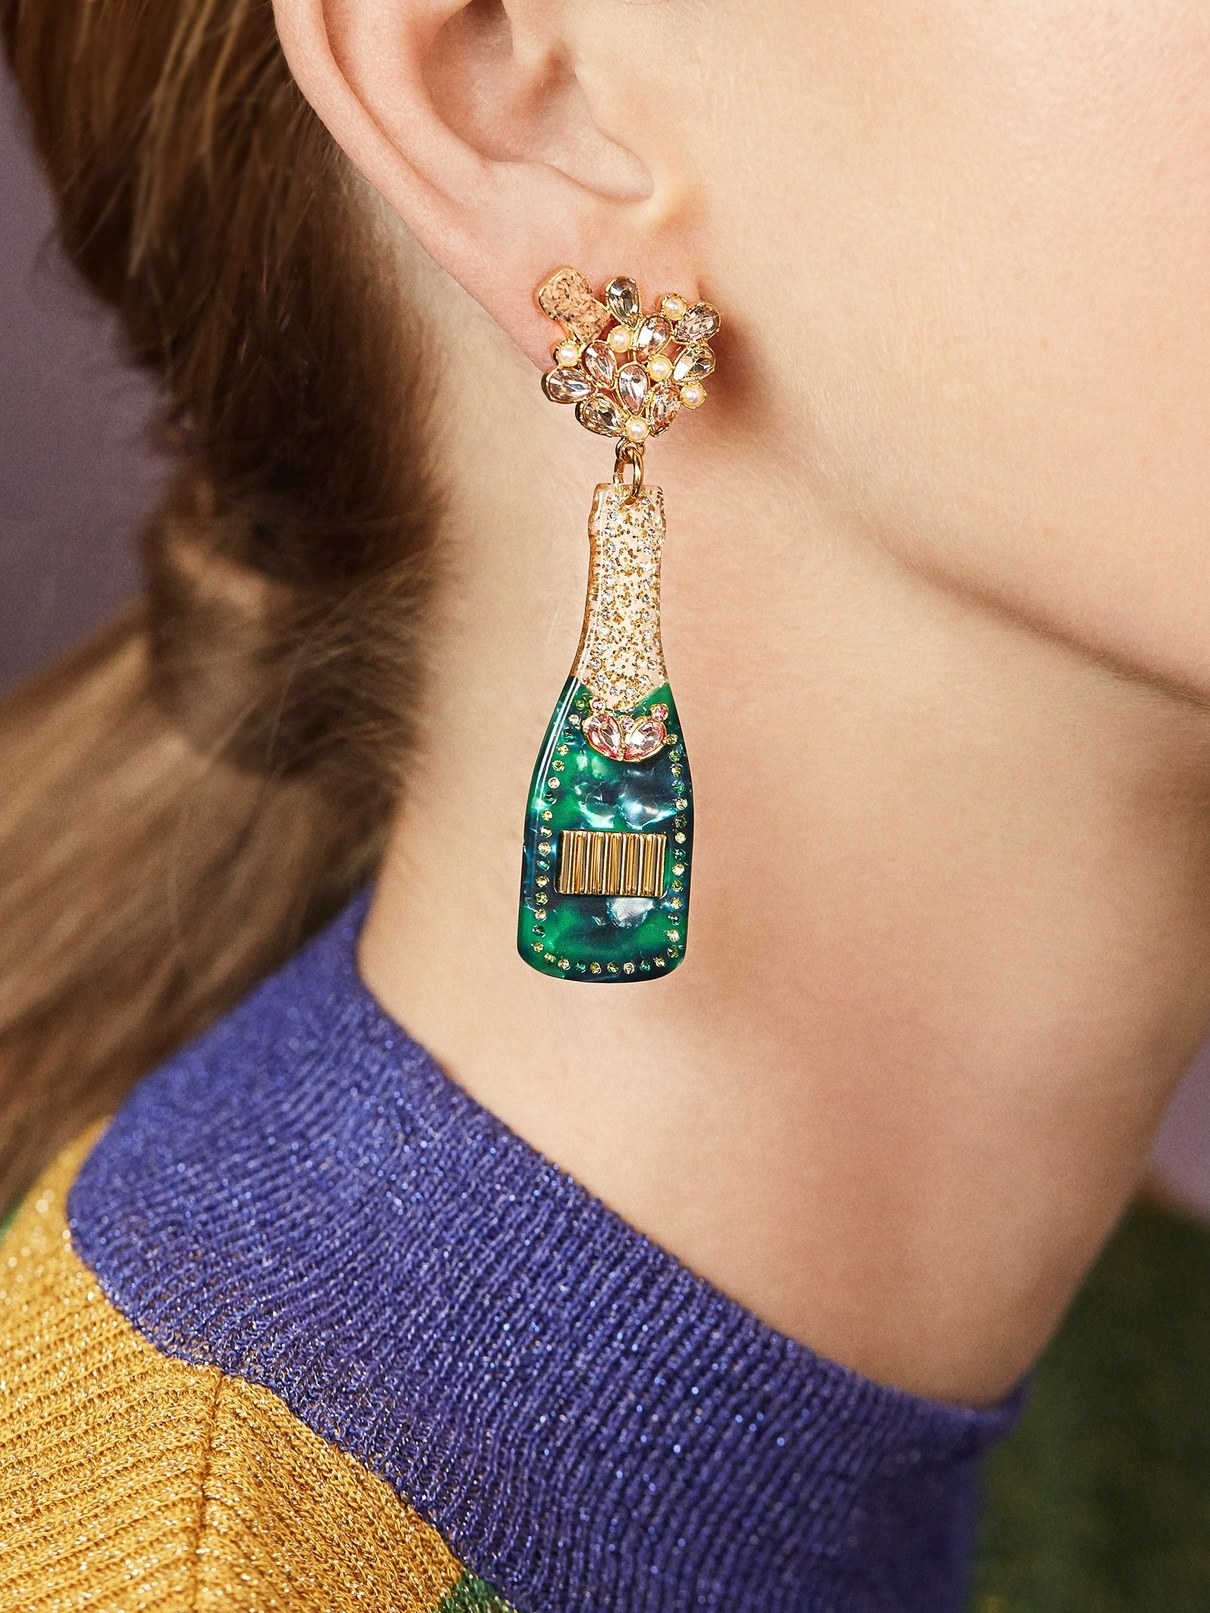 dangle earrings that look like a bottle of champagne with gems and a cork coming out of it